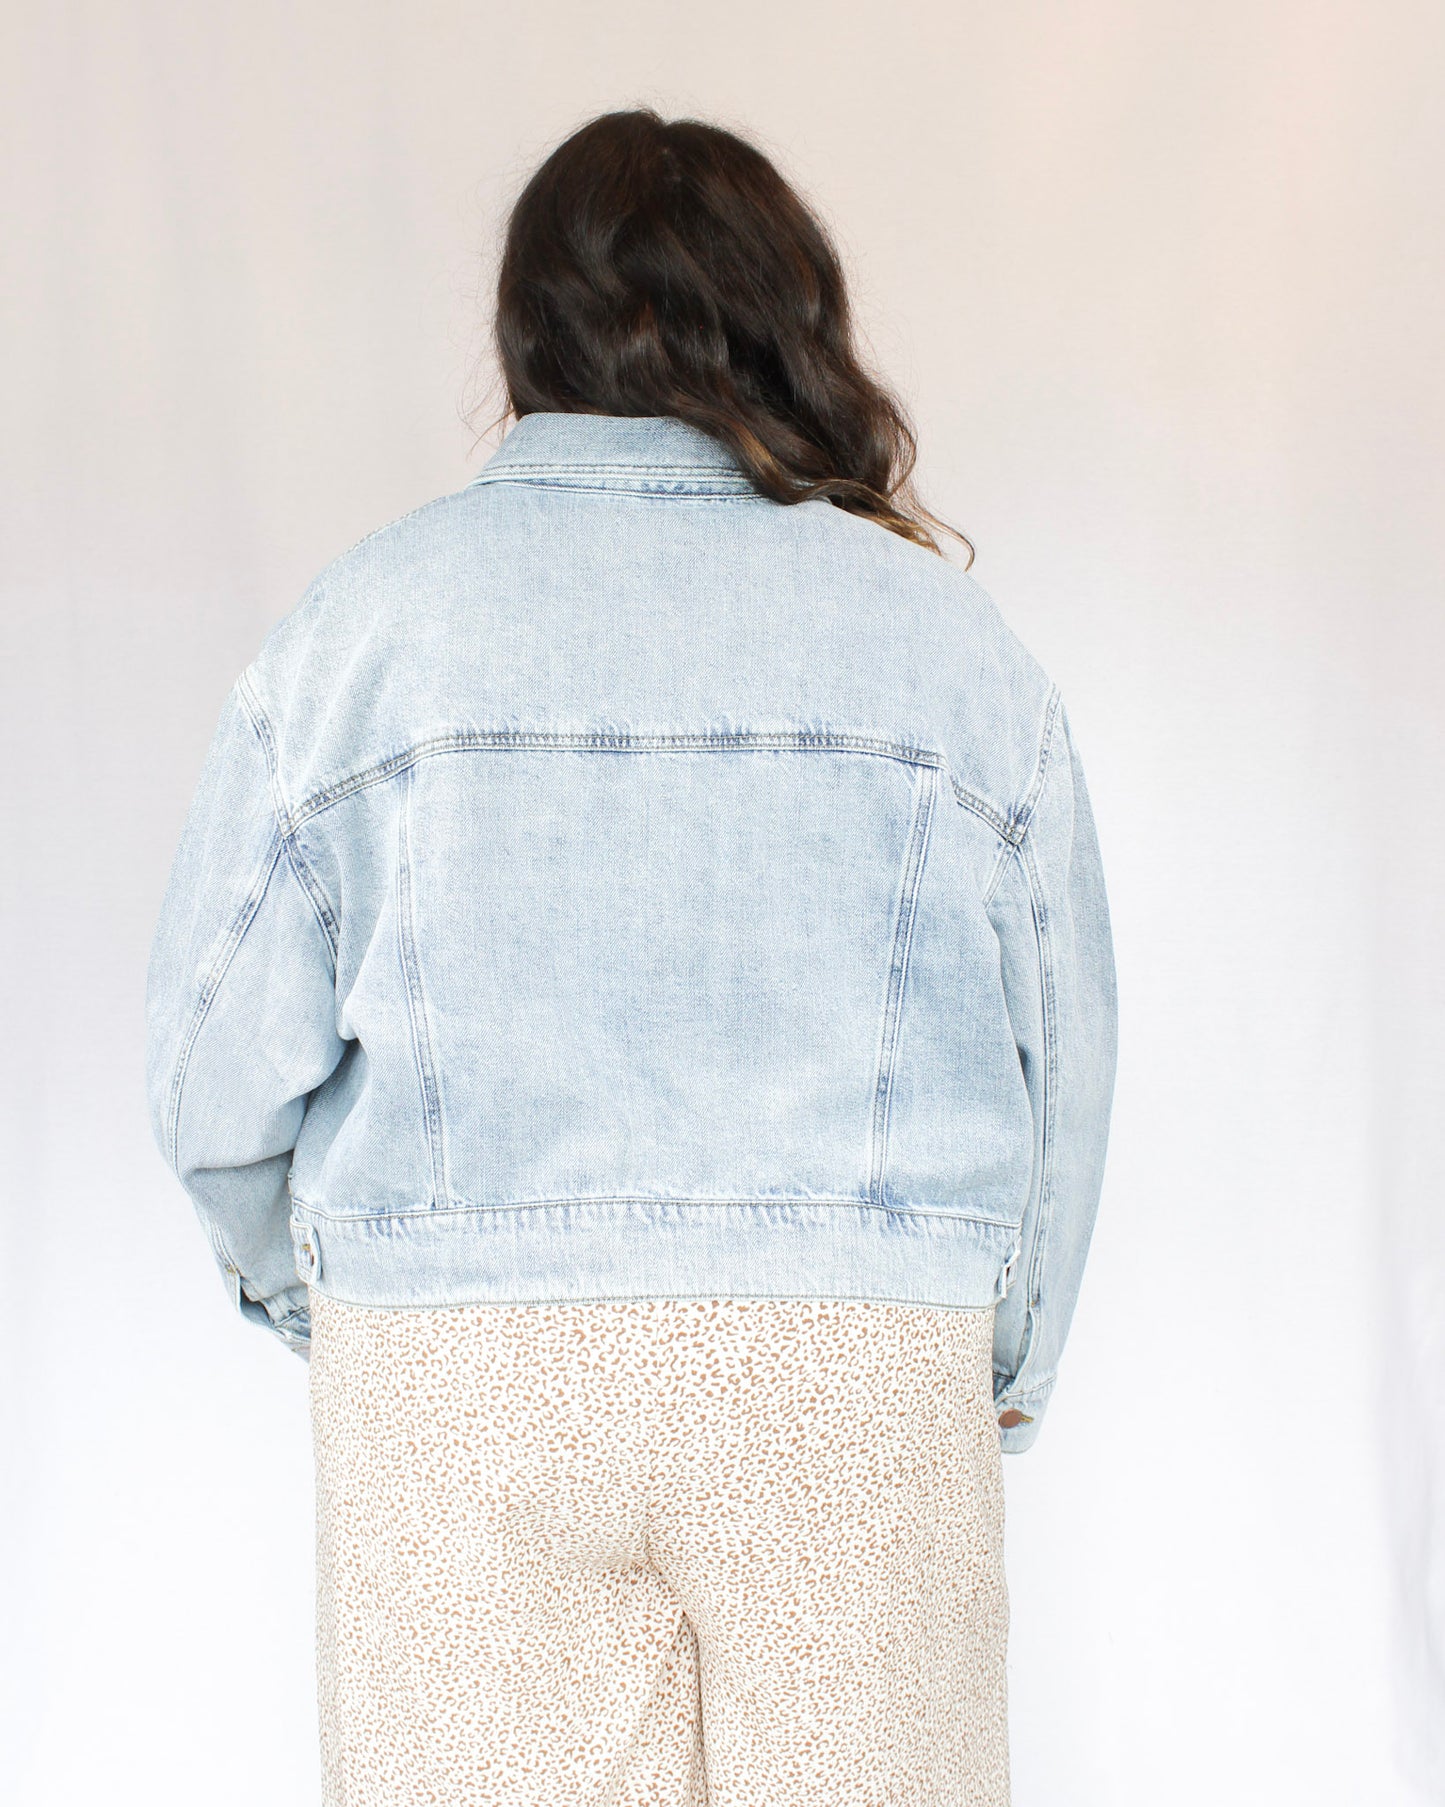 Slightly cropped light wash stretchy denim jacket with two chest pockets and two hand pockets, silver buttons